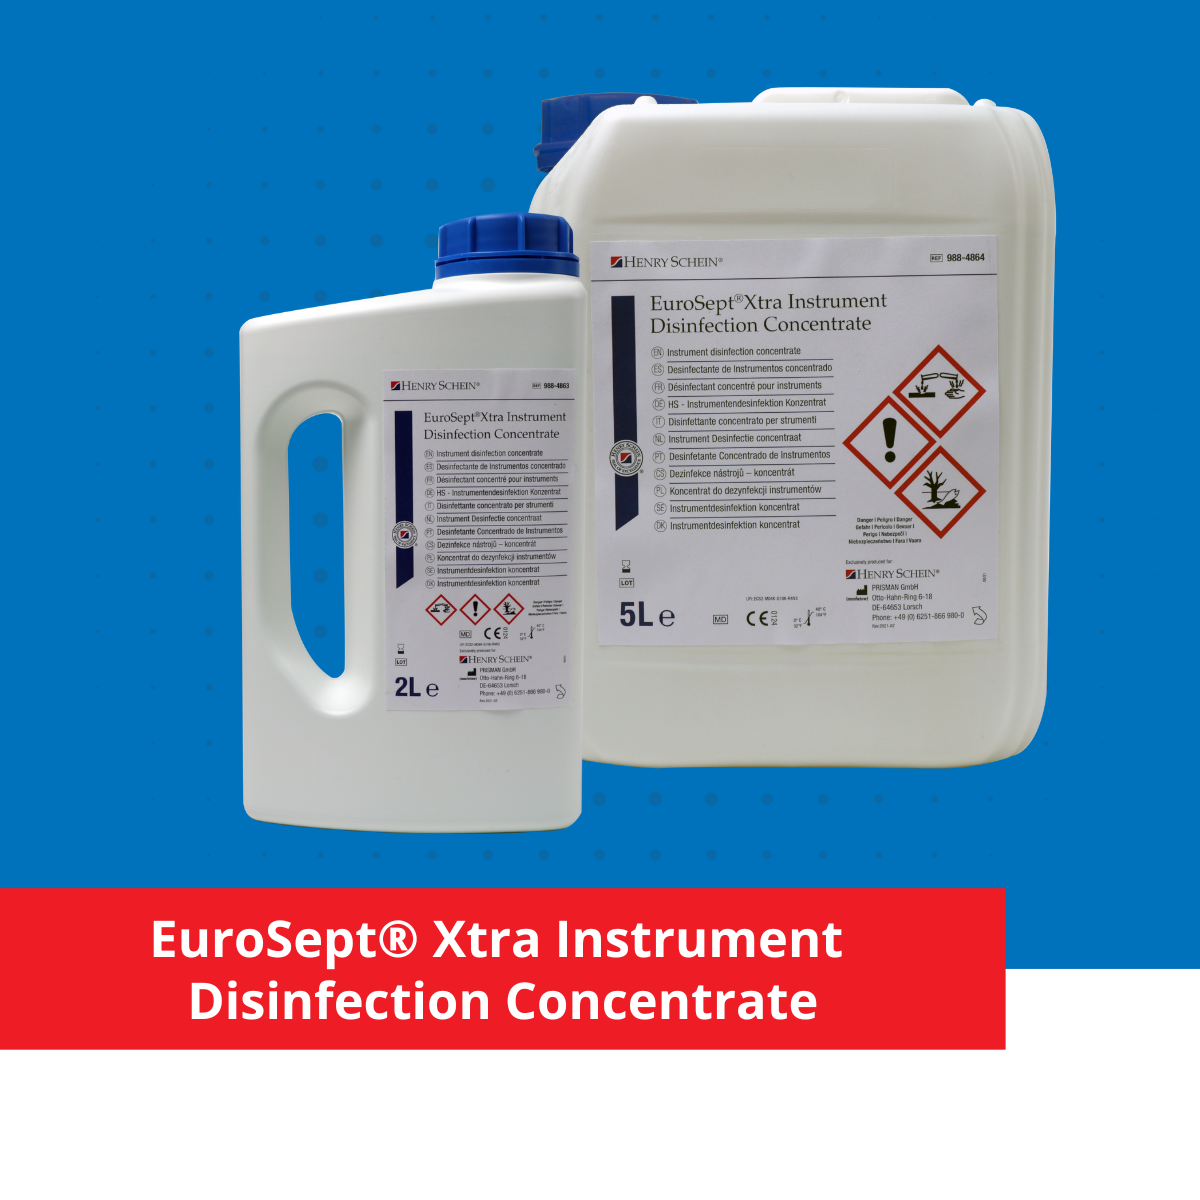 EuroSept Xtra Instrument Disinfection Concentrate